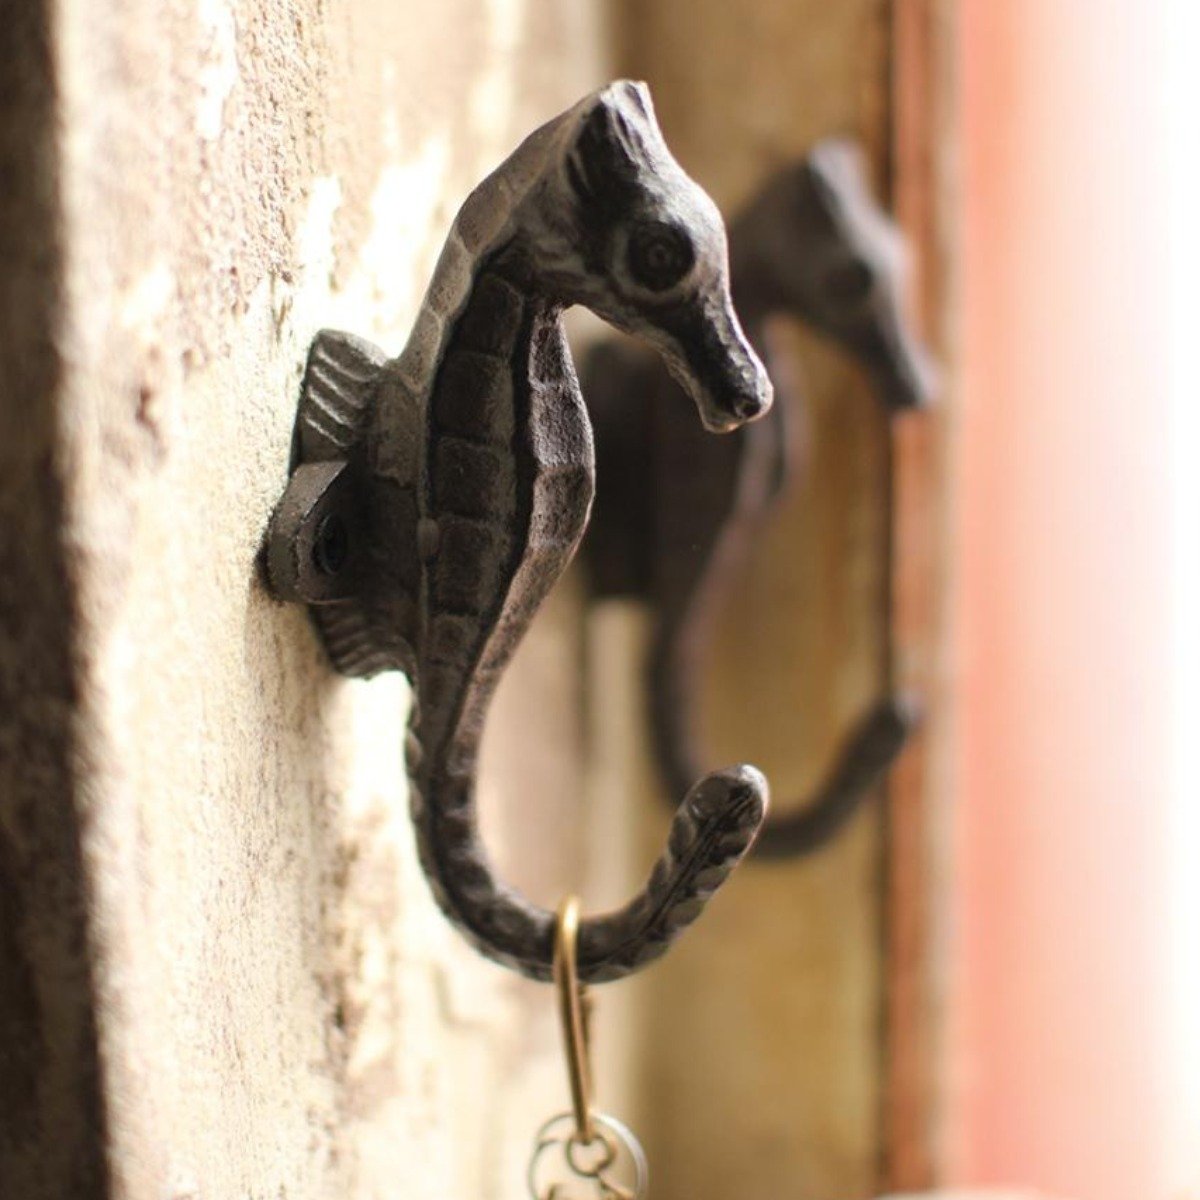 Inexpensive Gift Idea! Wall Art For Office & Home Decor/Décor: Metal Frog  Coat Hook With 3 Wrought Iron Hanger Hooks For Jewelry And Keys.